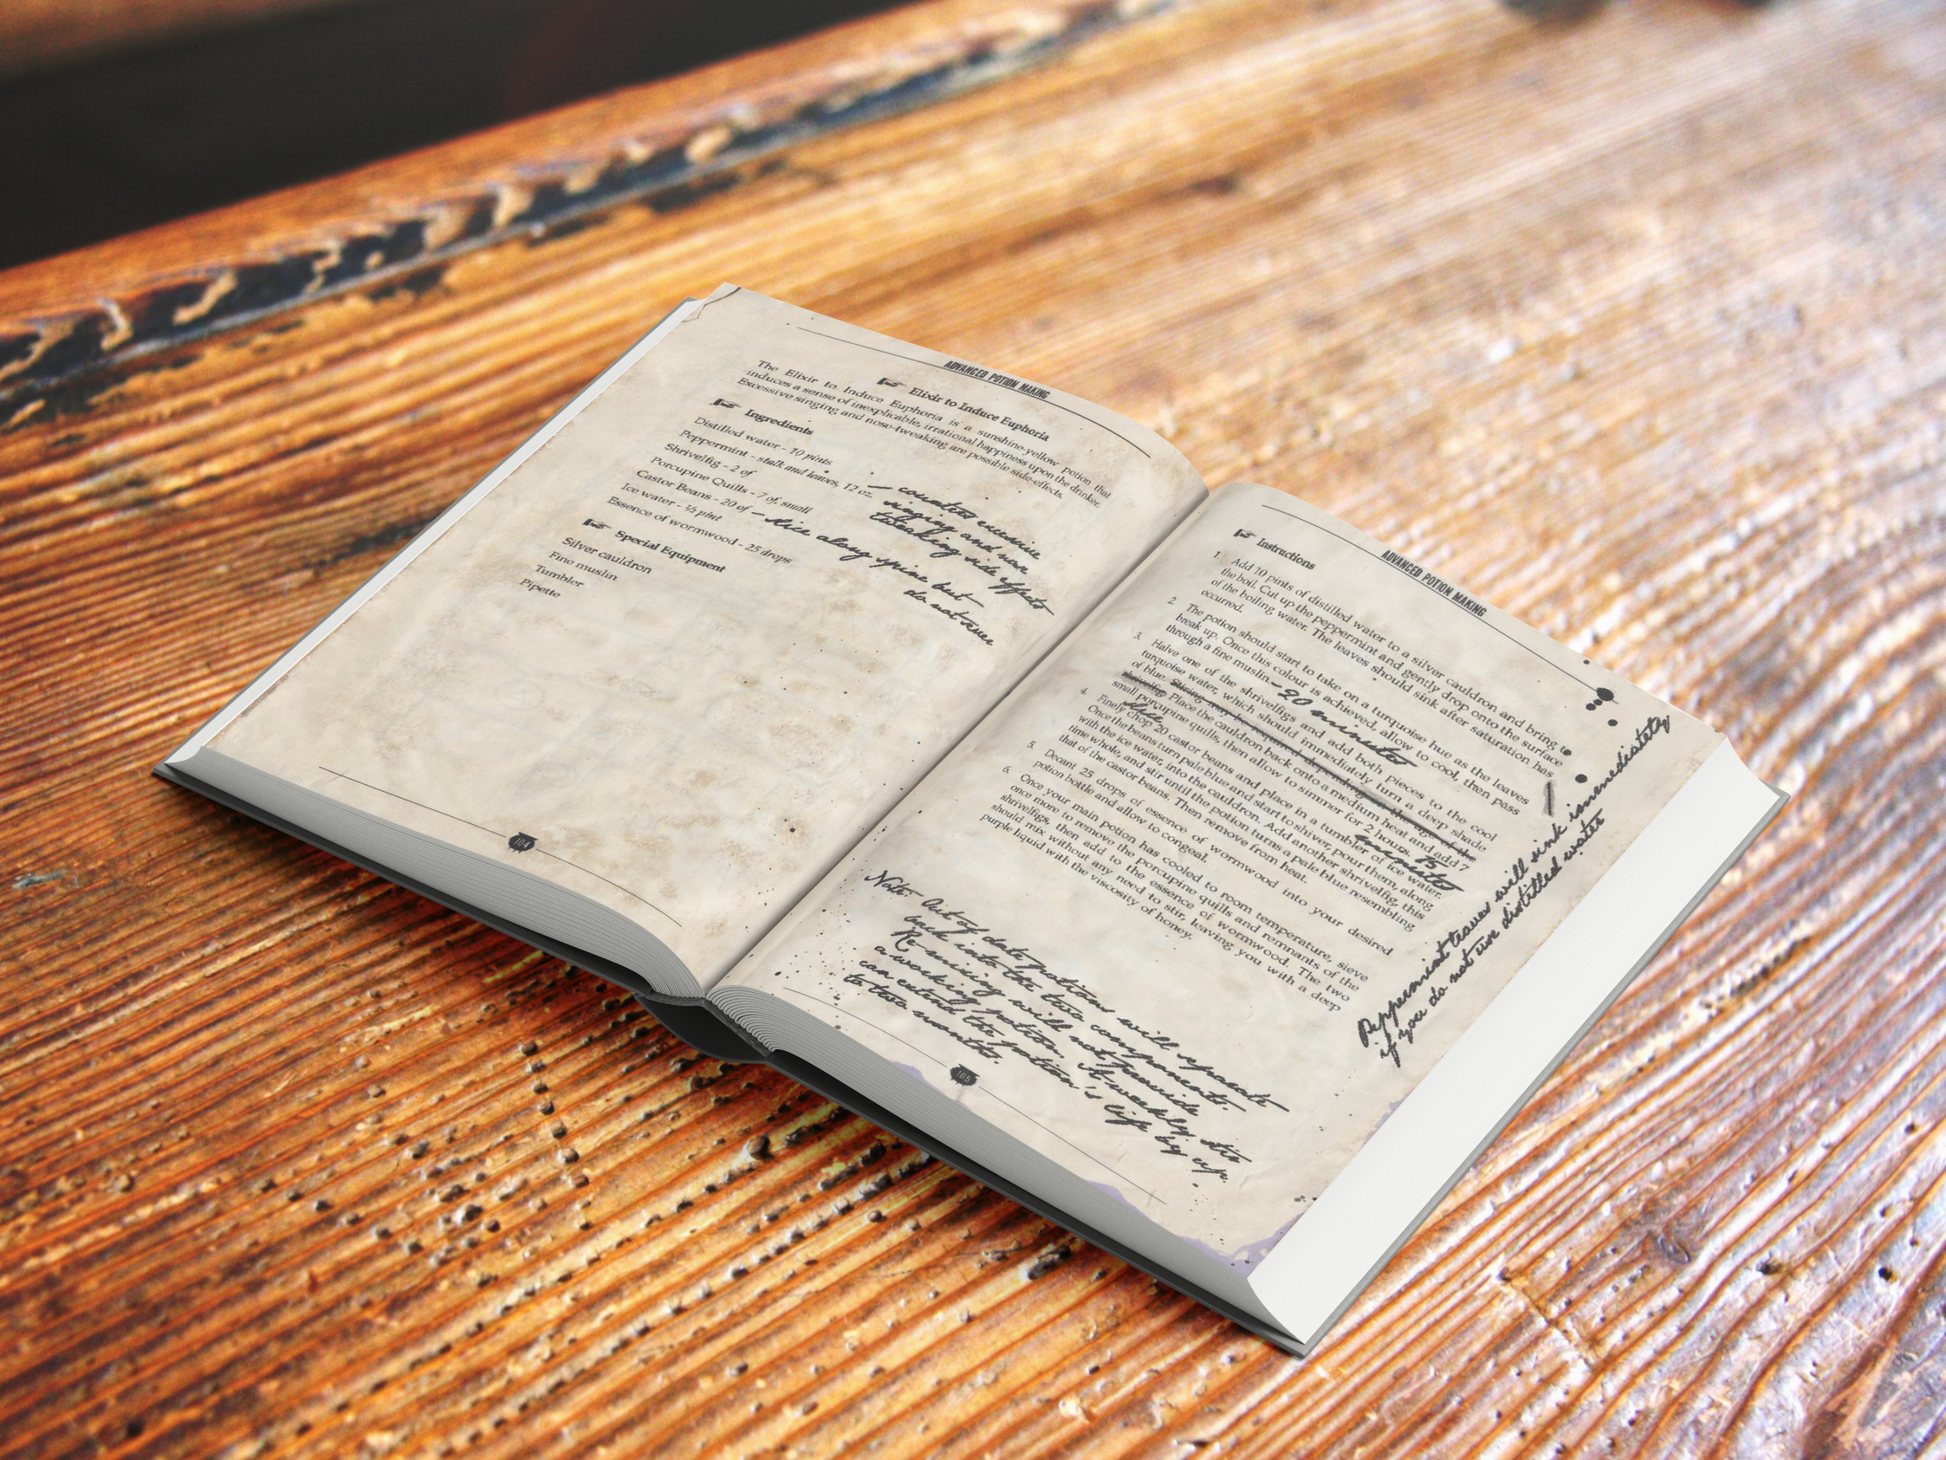 Harry Potter inspired 'Advanced Potion Making' book replica on a wooden background